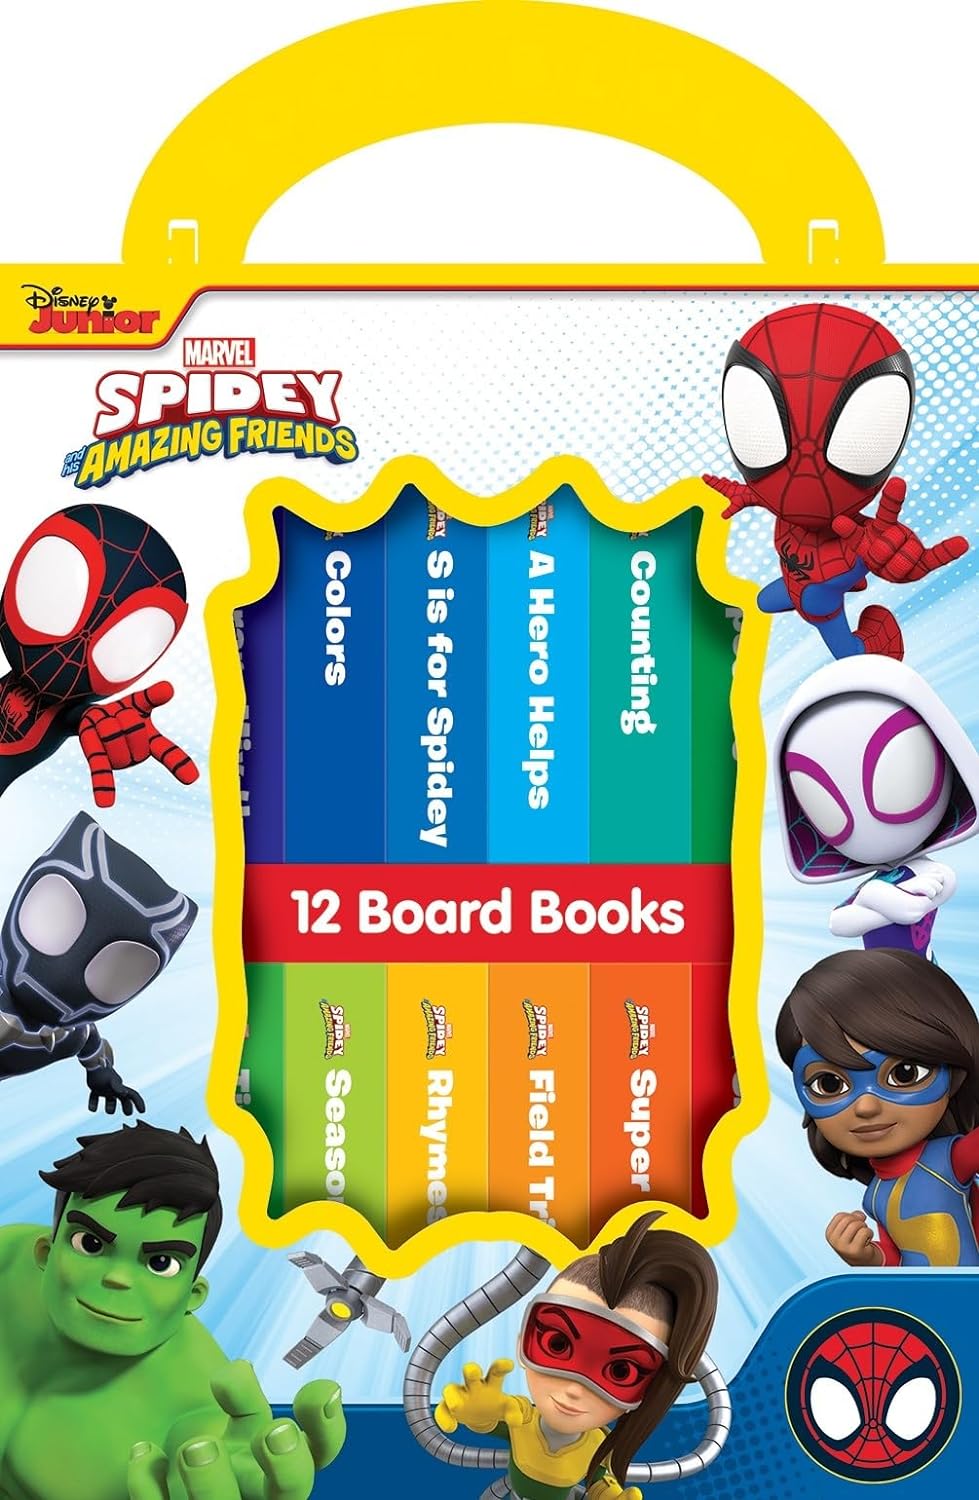 Marvel Spidey and his Amazing Friends - My First Library 12 Board Book Set